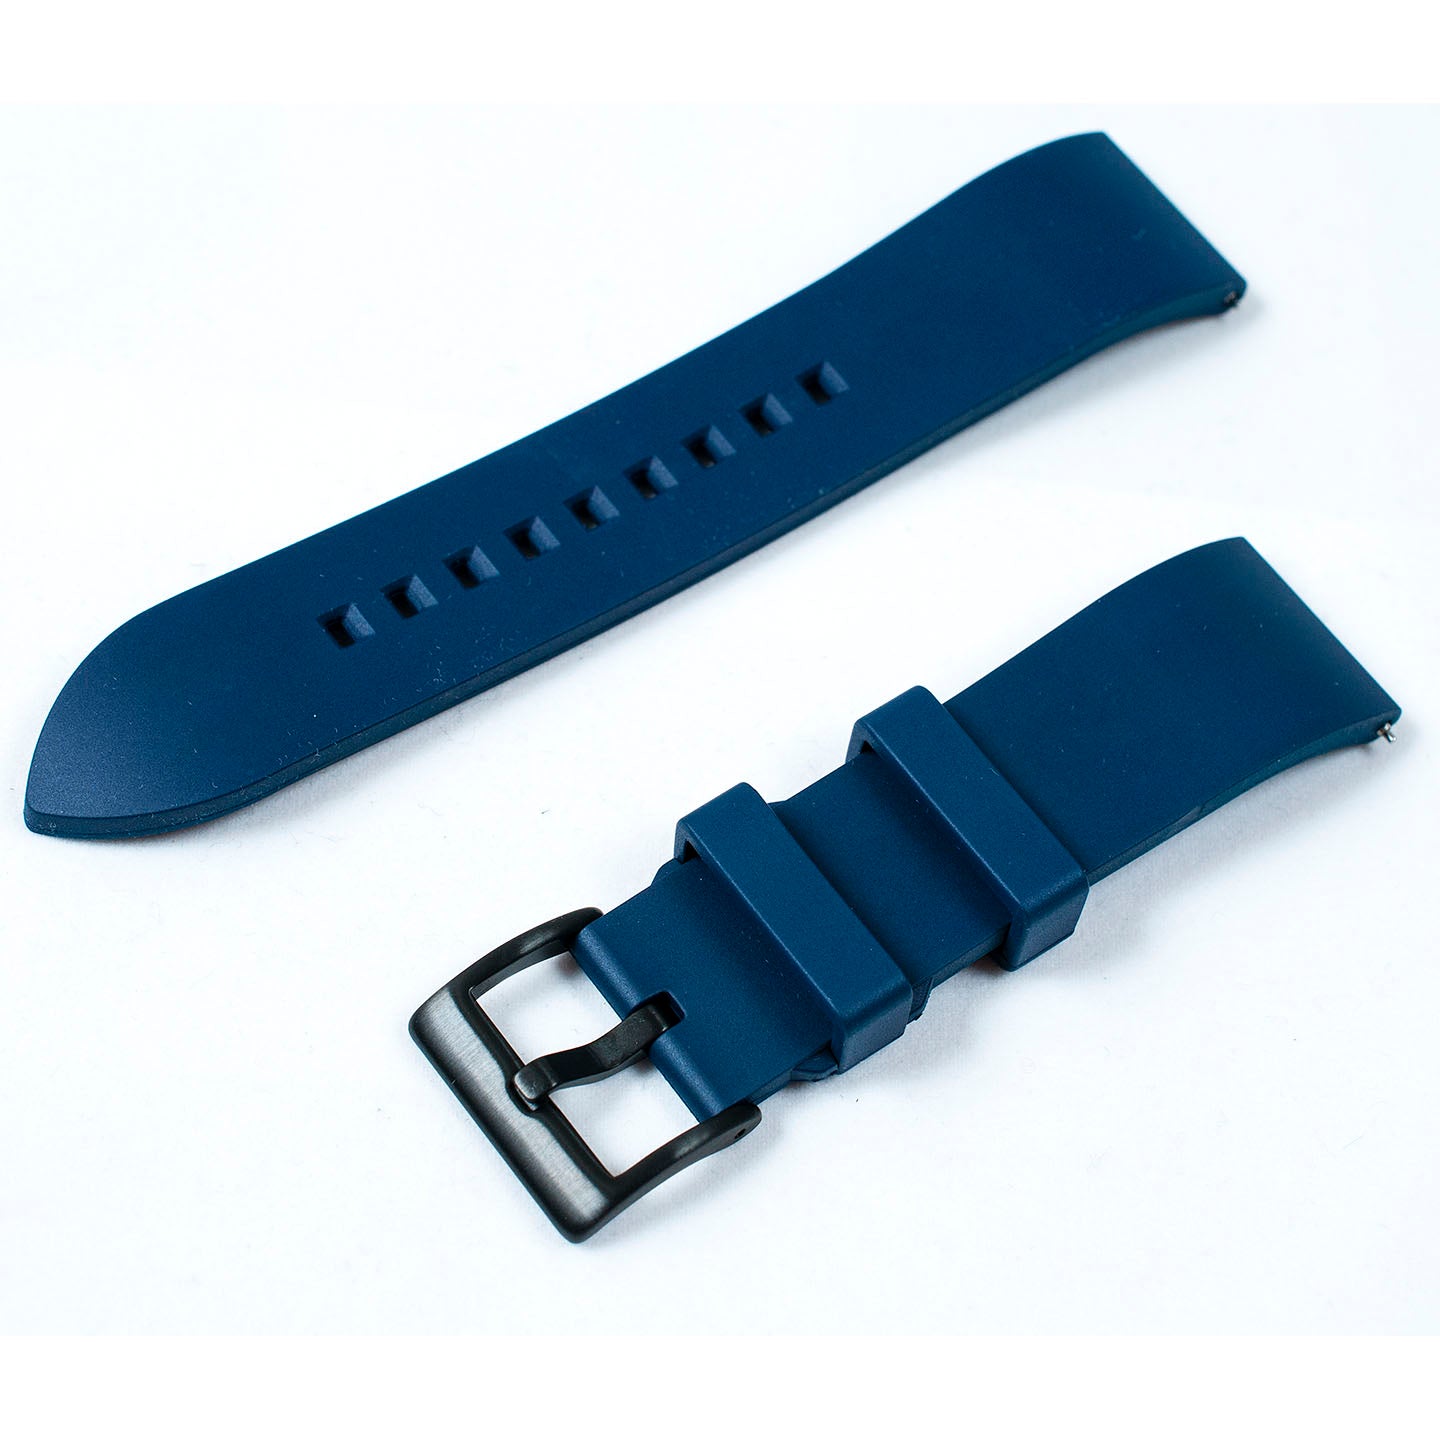 FKM Rubber Quick Release Replacement Watch Straps Bands 19mm 20,mm 21mm 22mm 24mm blue with black buckle